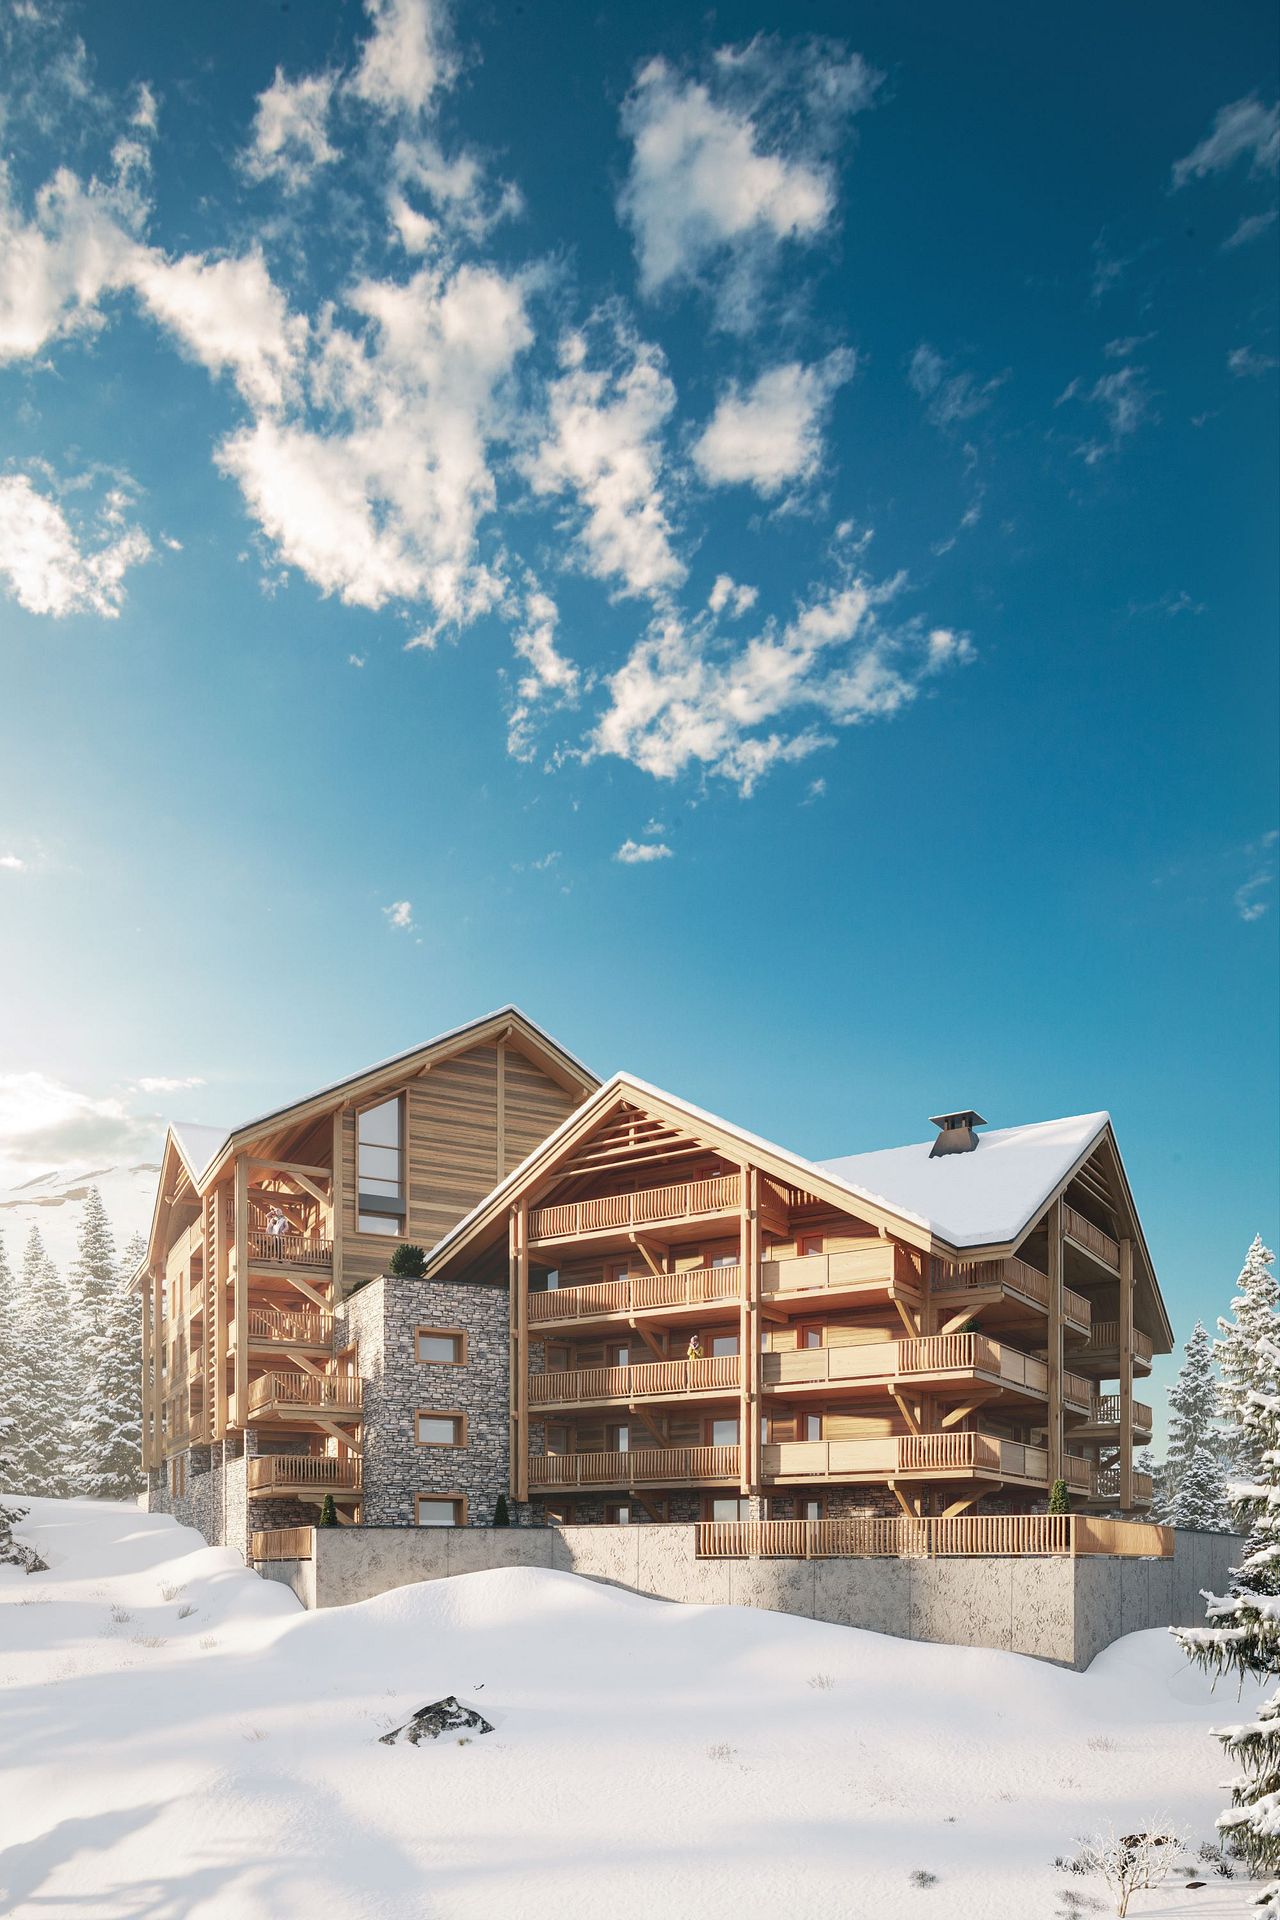 4 bed Apartment For Sale in Les Les Sybelles, French Alps